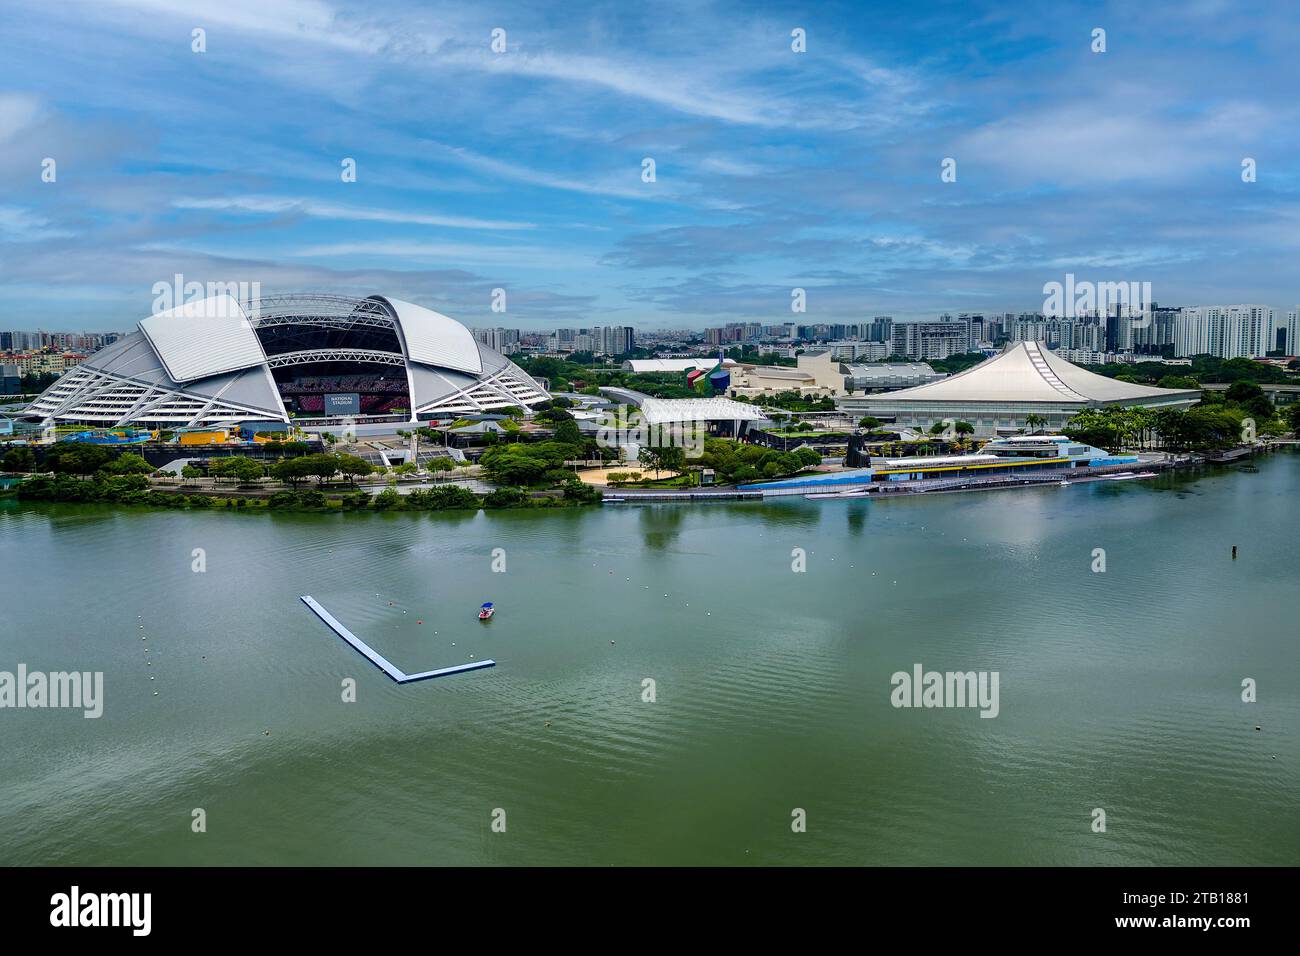 Aerial view of the Singapore National Stadium and Sports Hub next to the Kallang Basin and reservoir Stock Photo